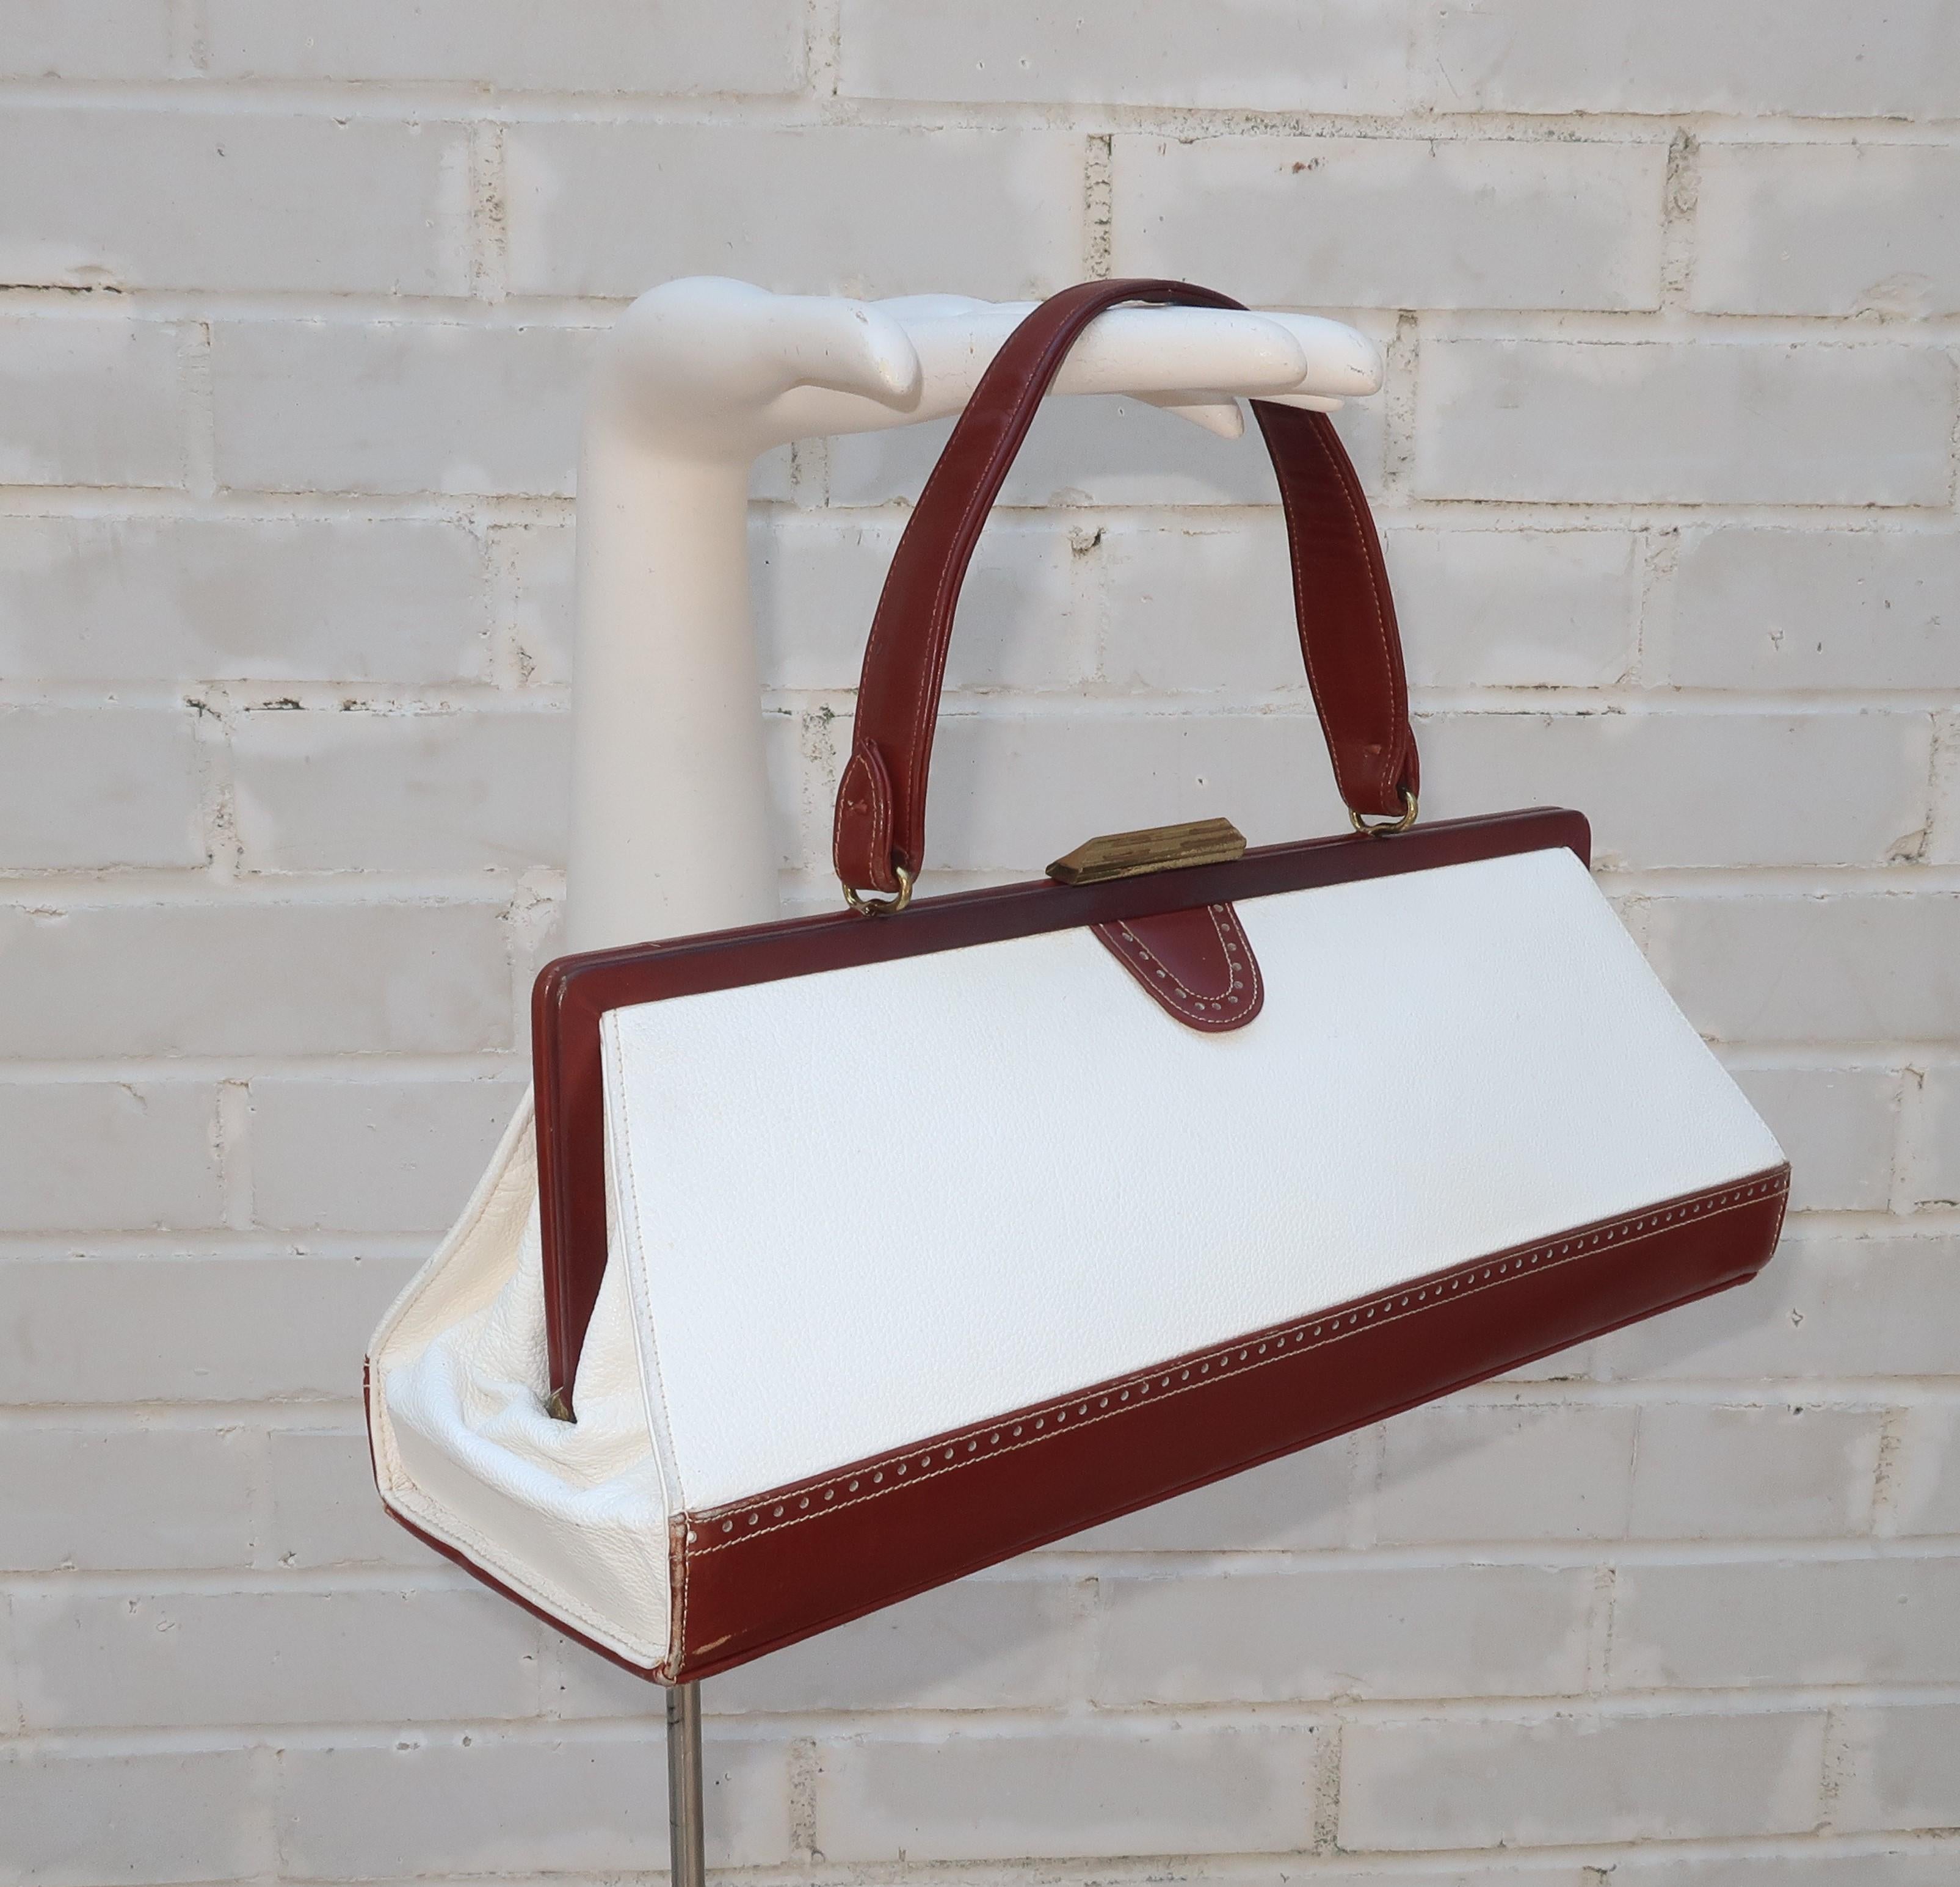 A classic spectator look never goes out of style!  This 1950’s J. Miller handbag features a unique elongated shape fabricated from smooth brown and pebbled white two-tone leathers with a classic spectator perforated design.  The push button gold